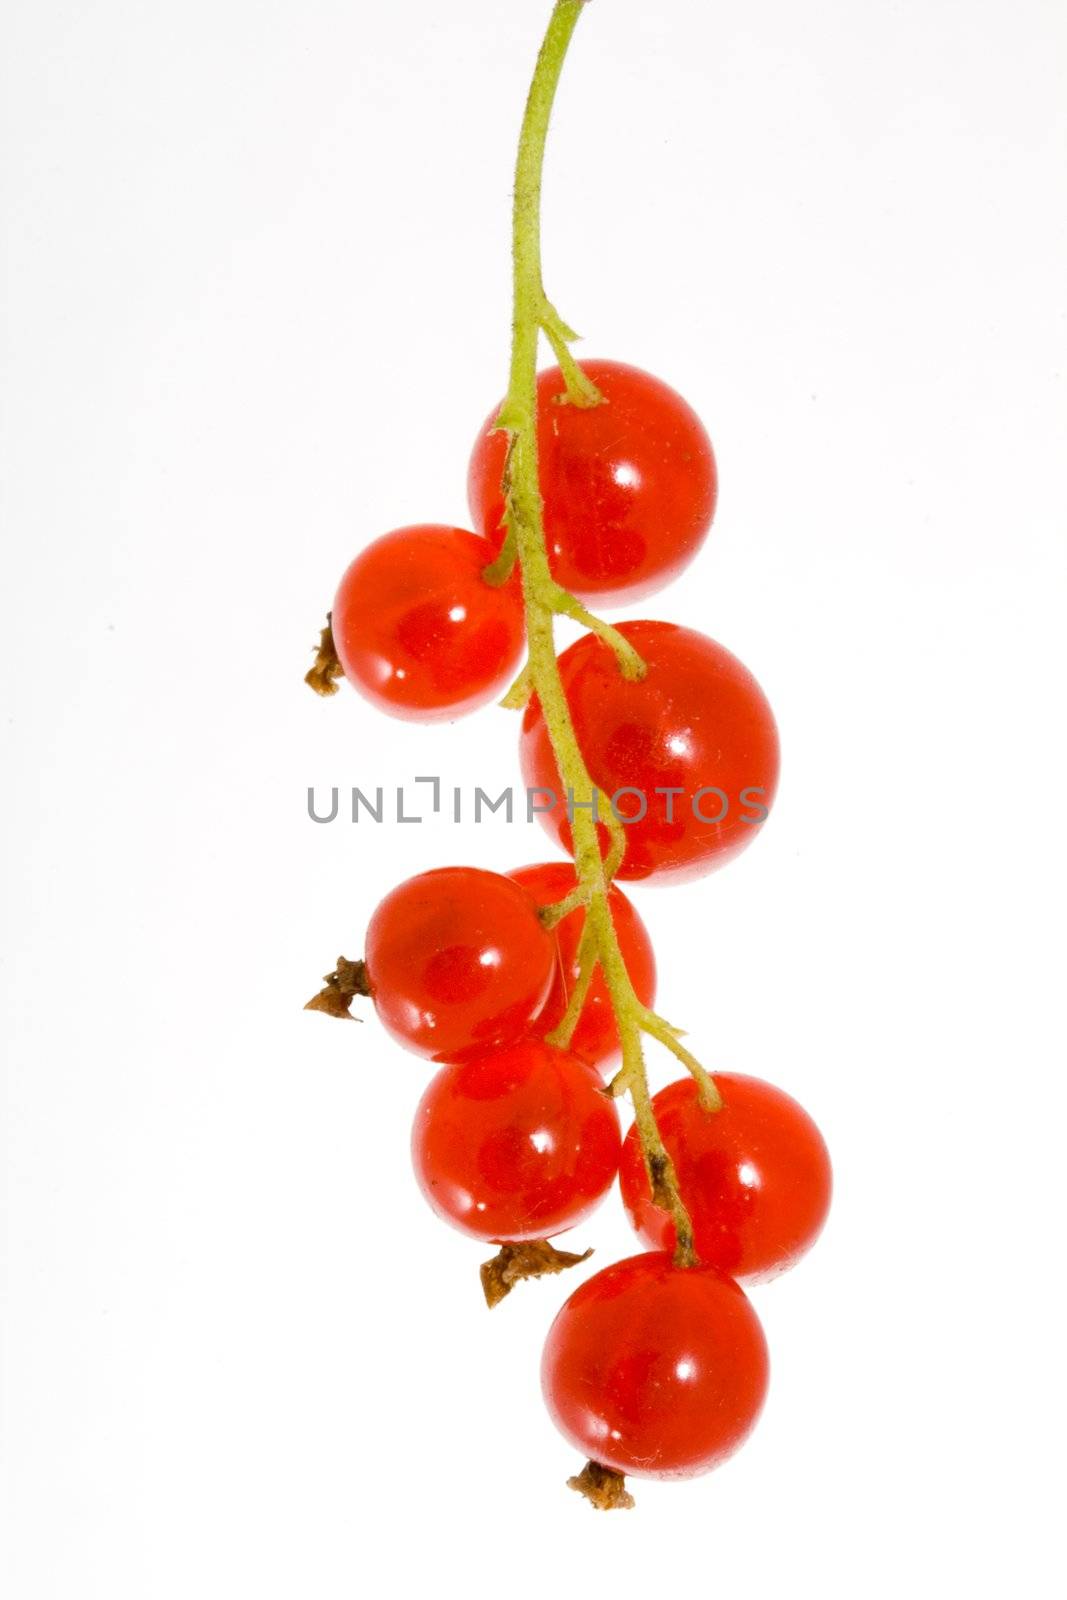 Red Currants by werg